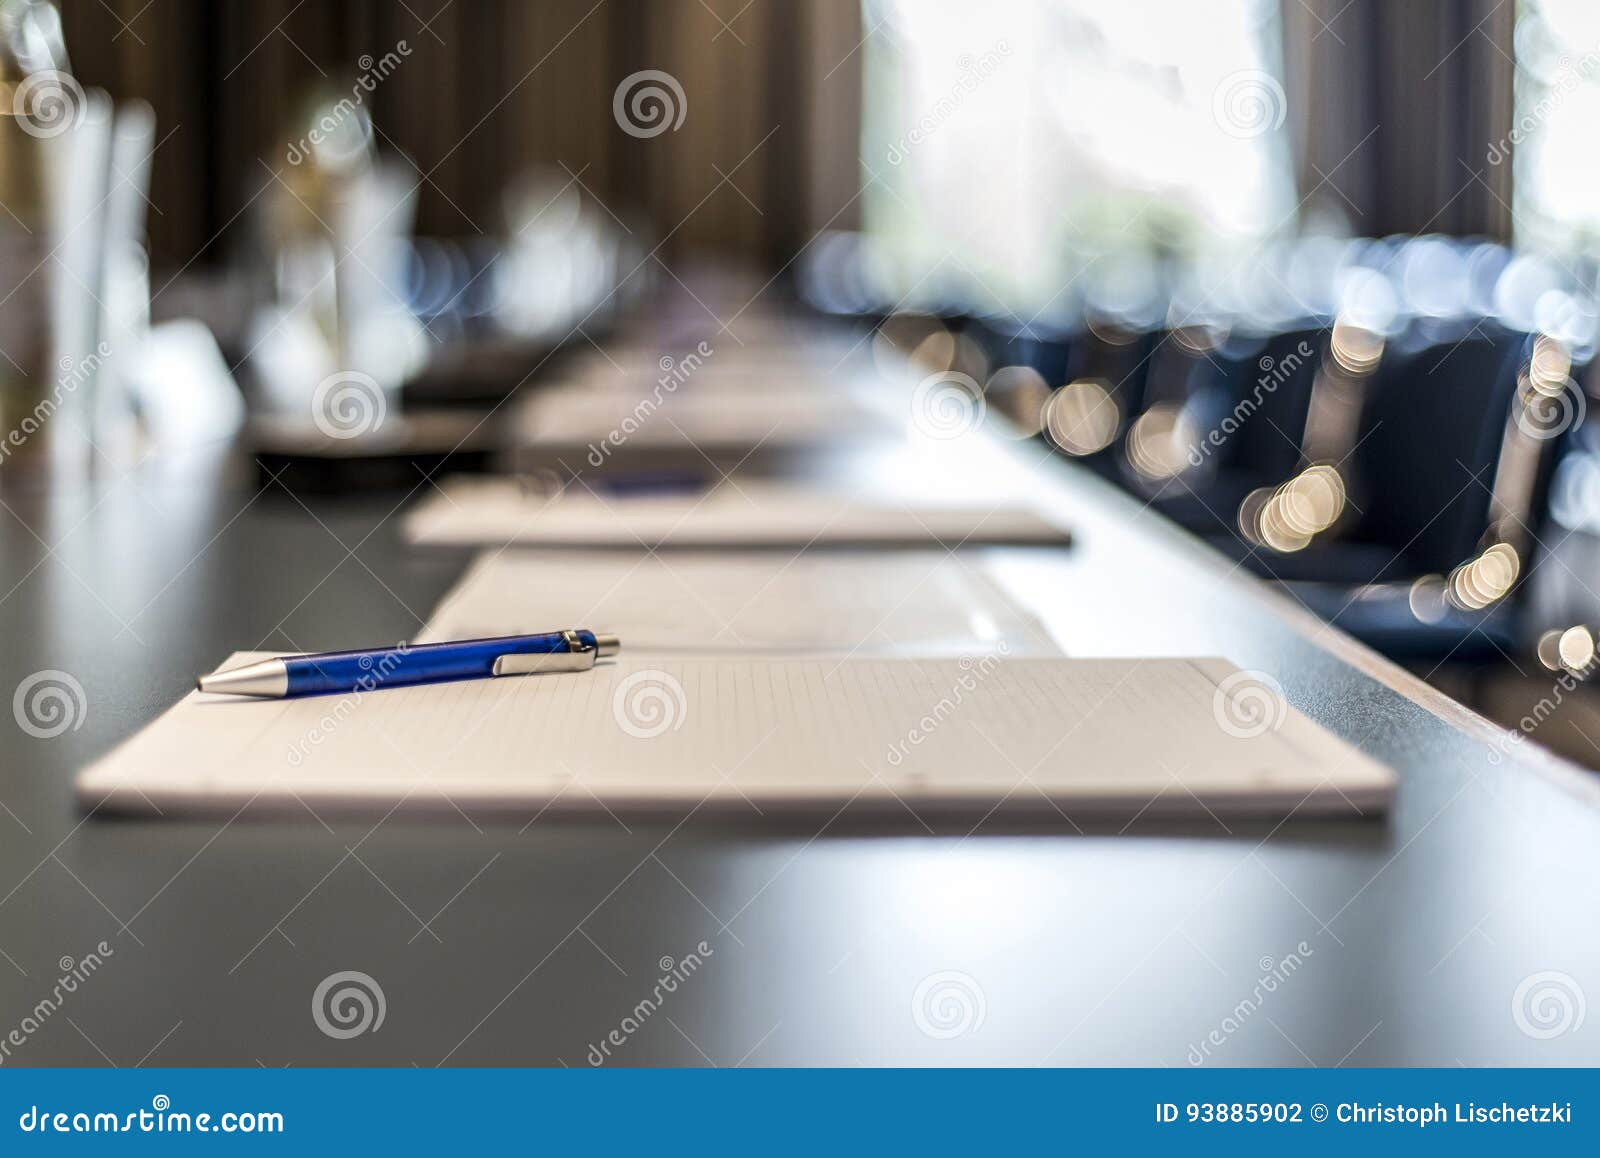 close up of dark conference table water glasses pens, paper sheets and blurry window background